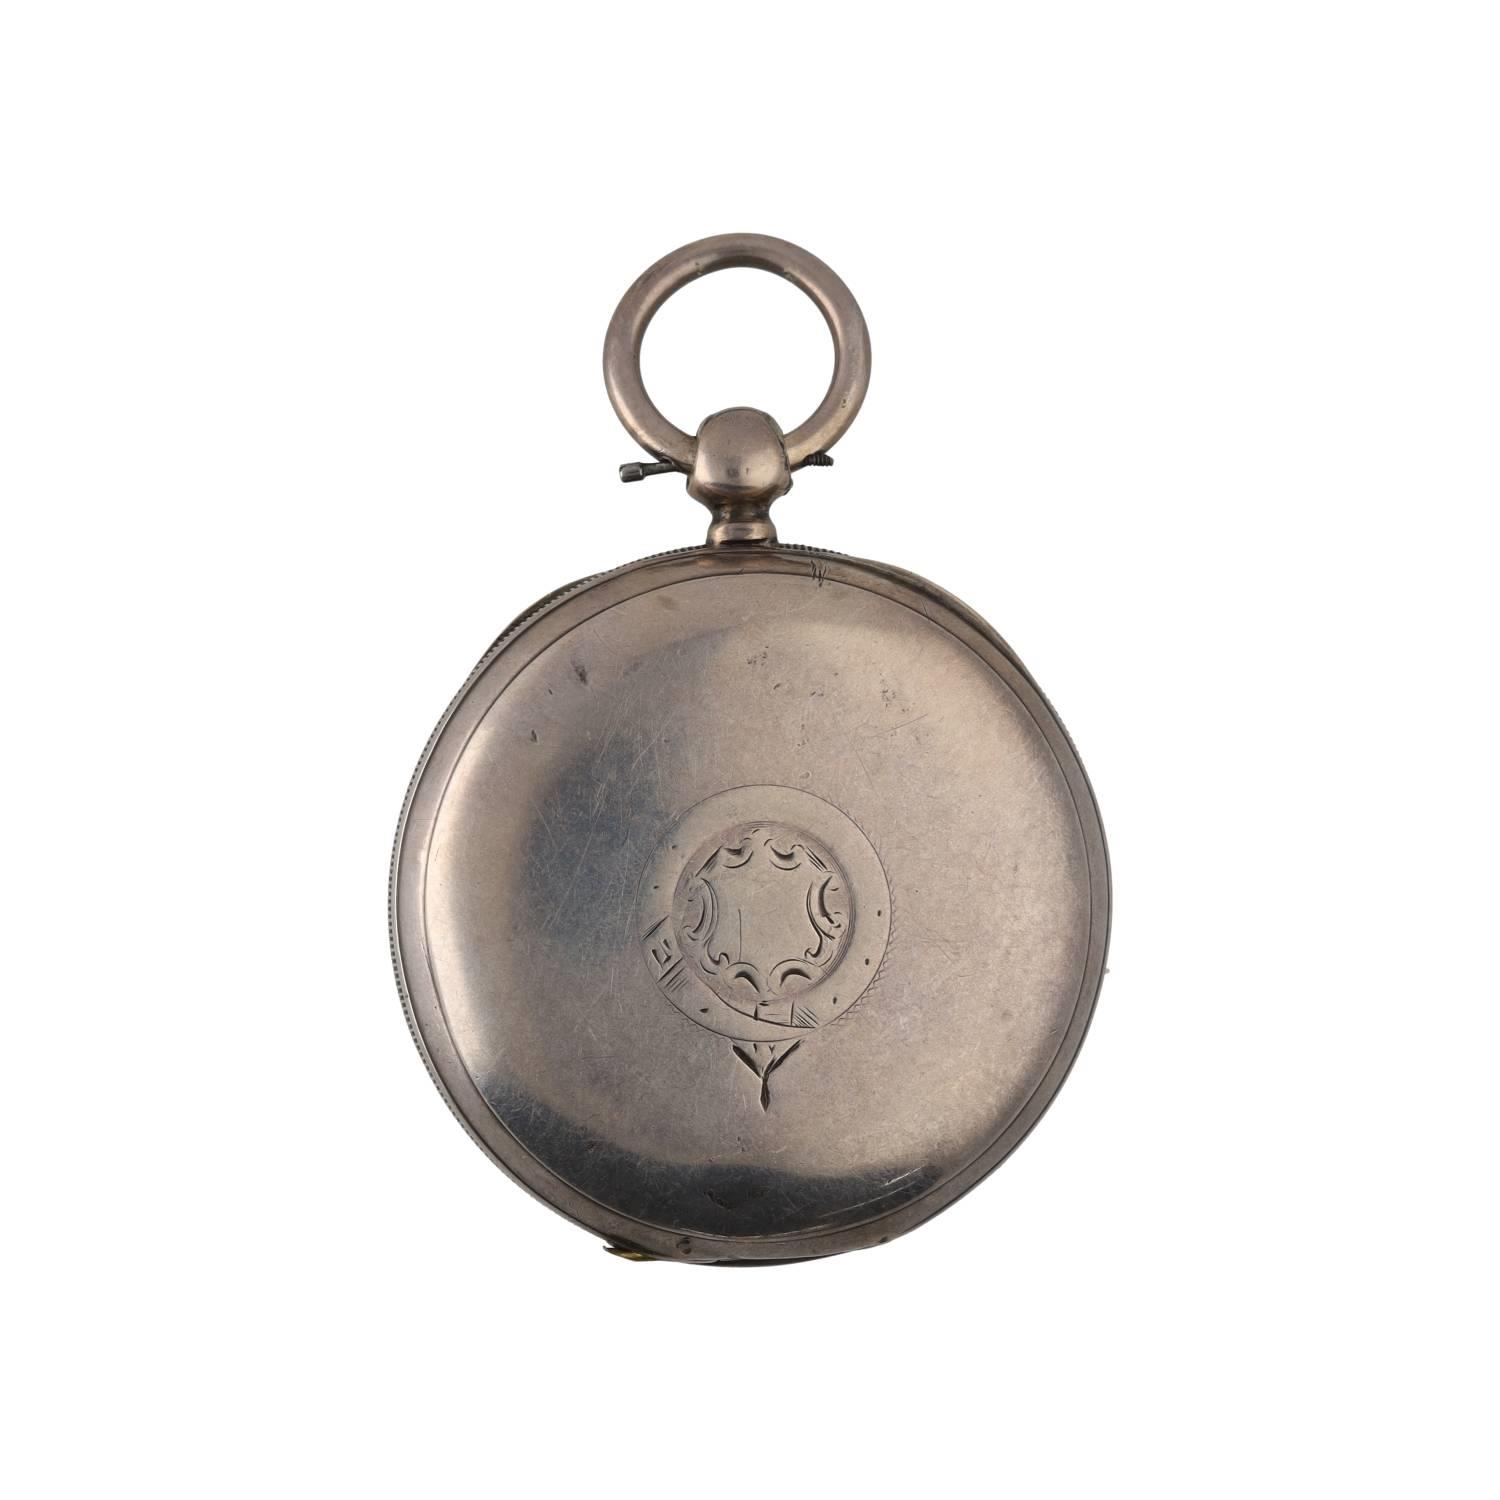 American Waltham silver lever pocket watch, circa 1884, serial no. 2355992, signed movement with - Image 3 of 3